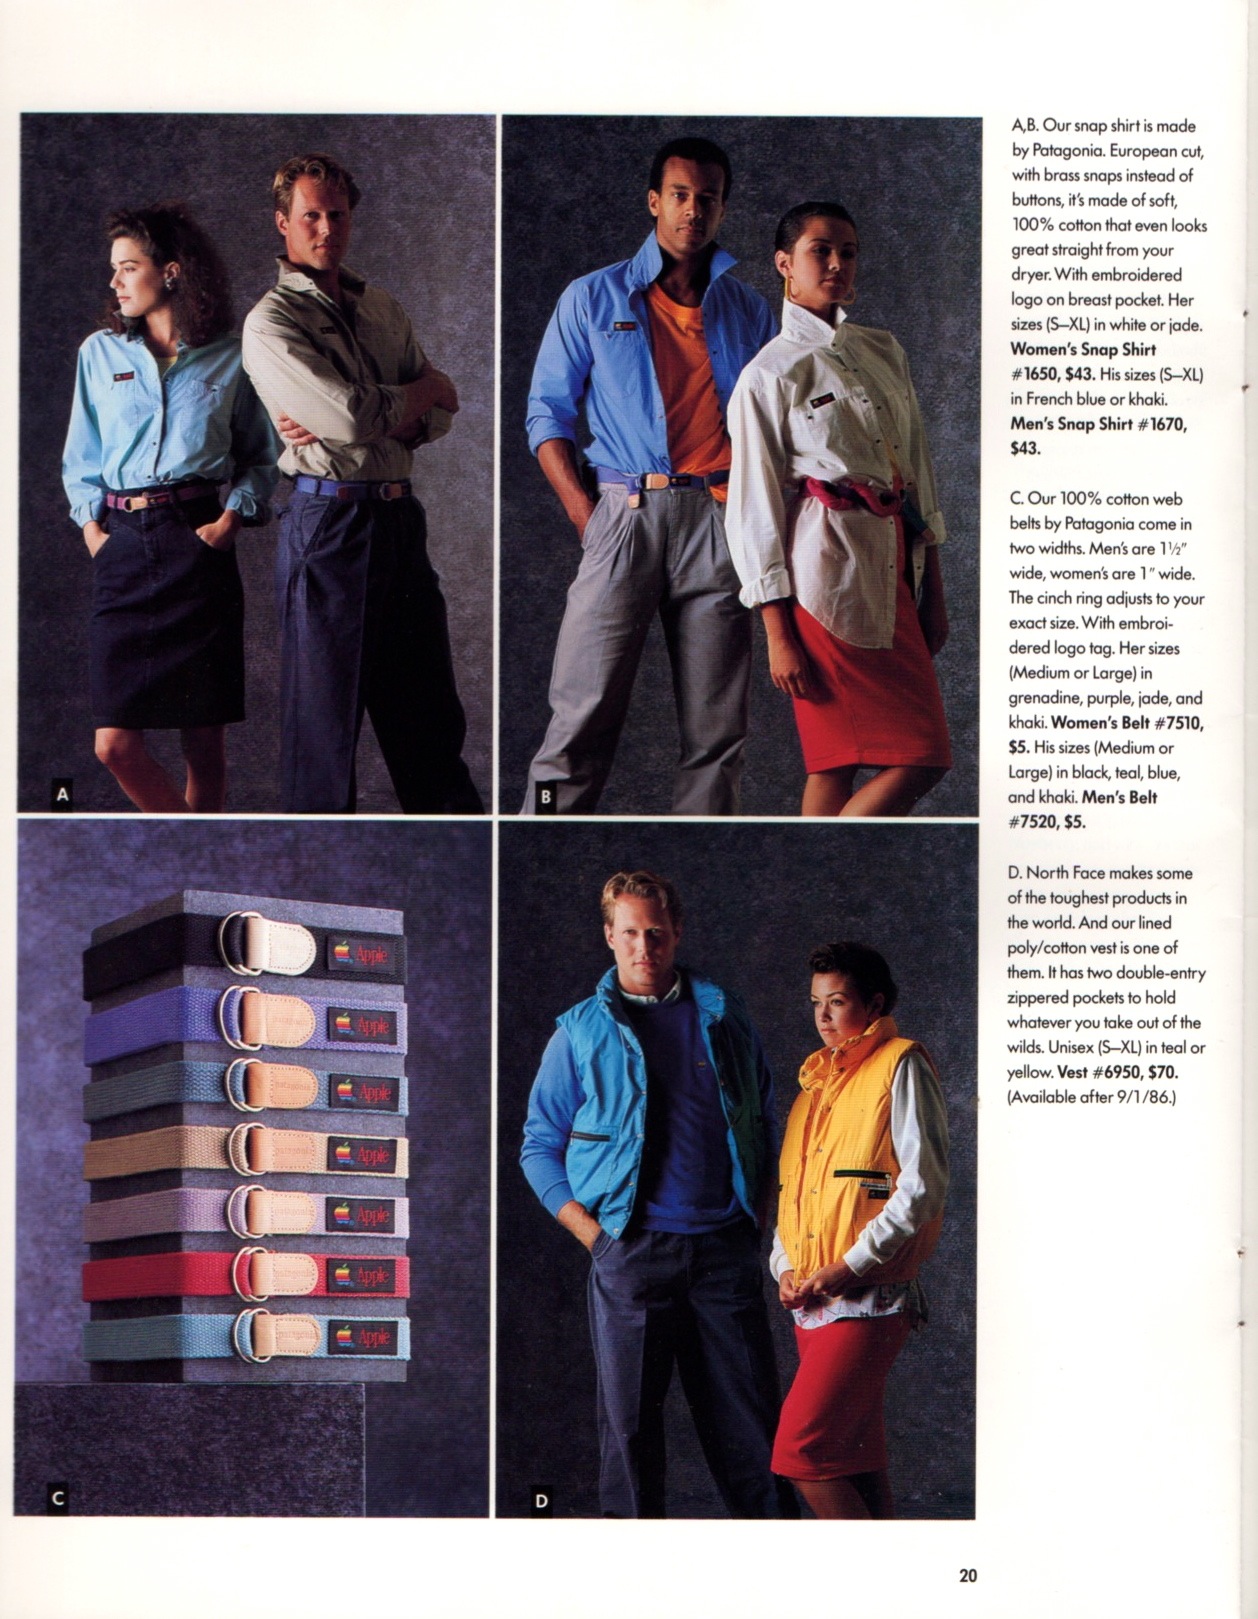 The Time Apple Launched A Clothing Line - I'm A Useless Info Junkie